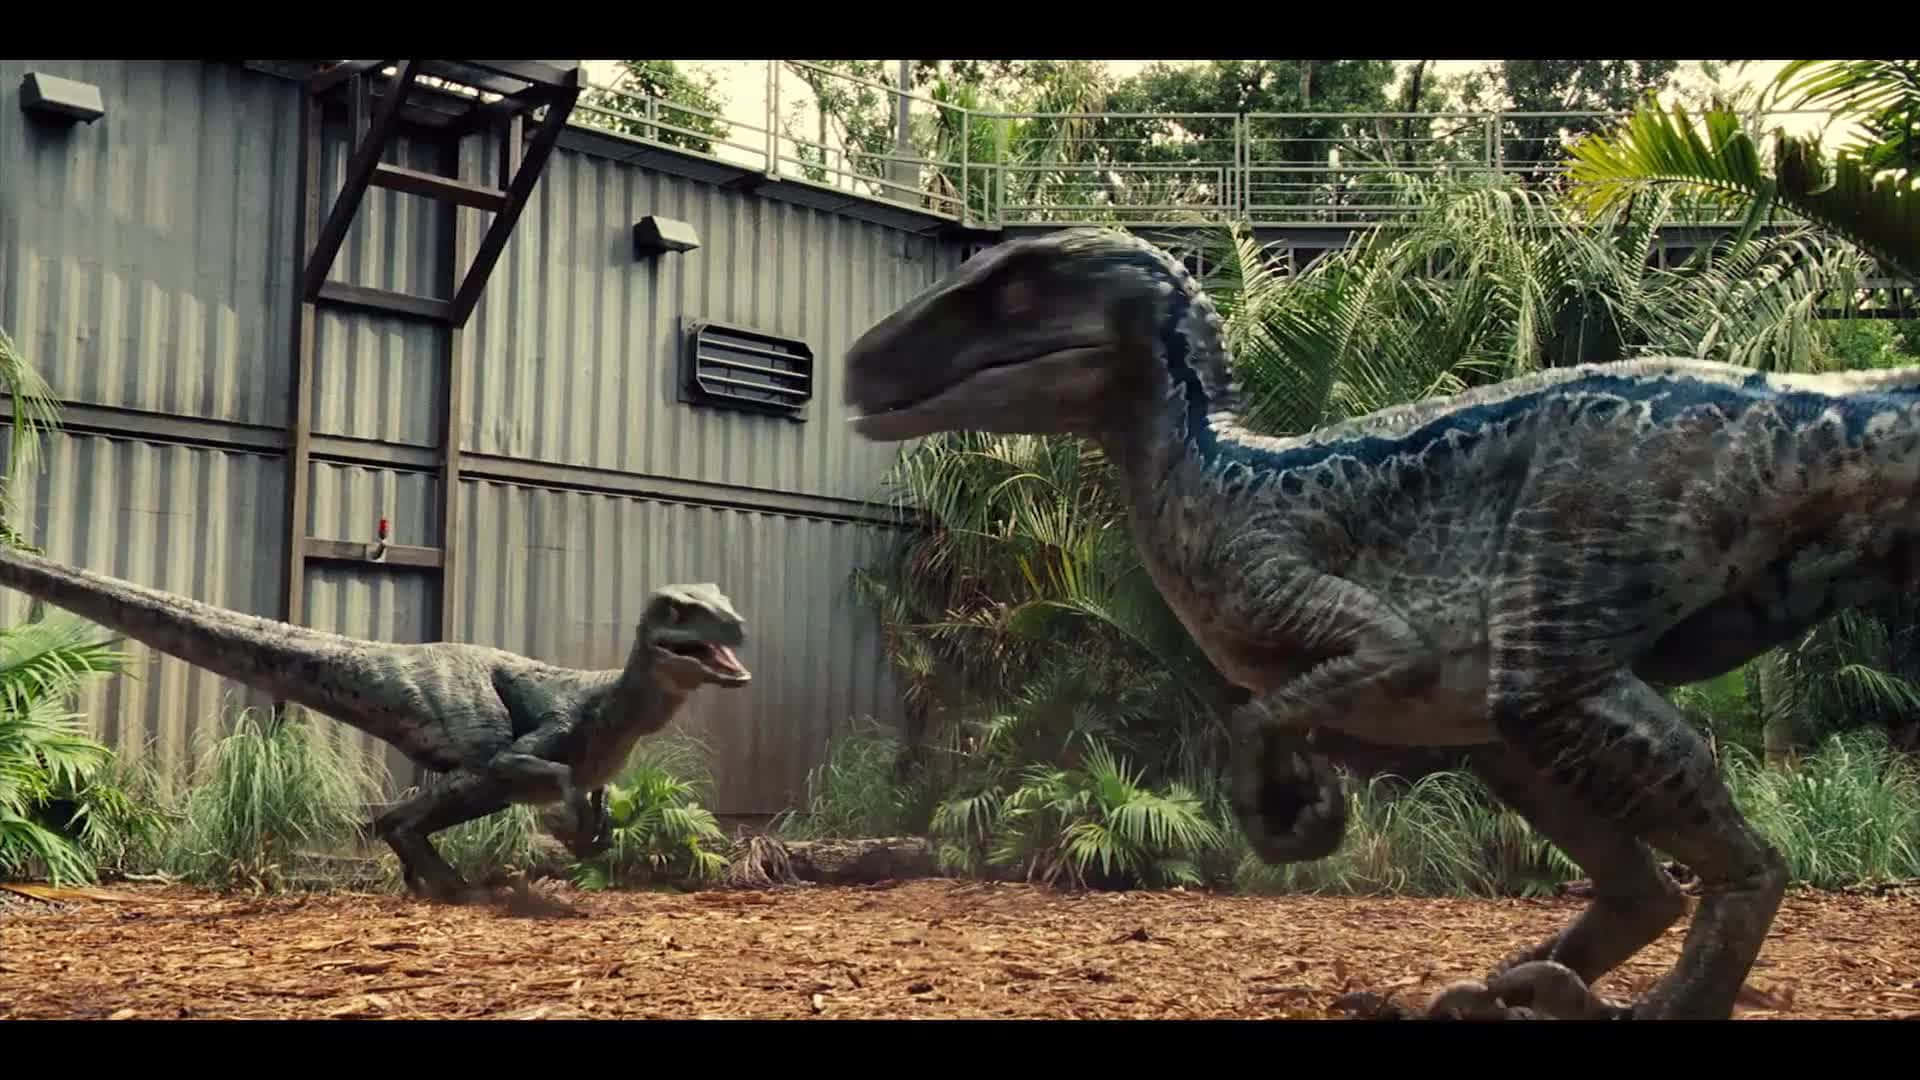 A Realistic Image of a Dinosaur Wallpaper